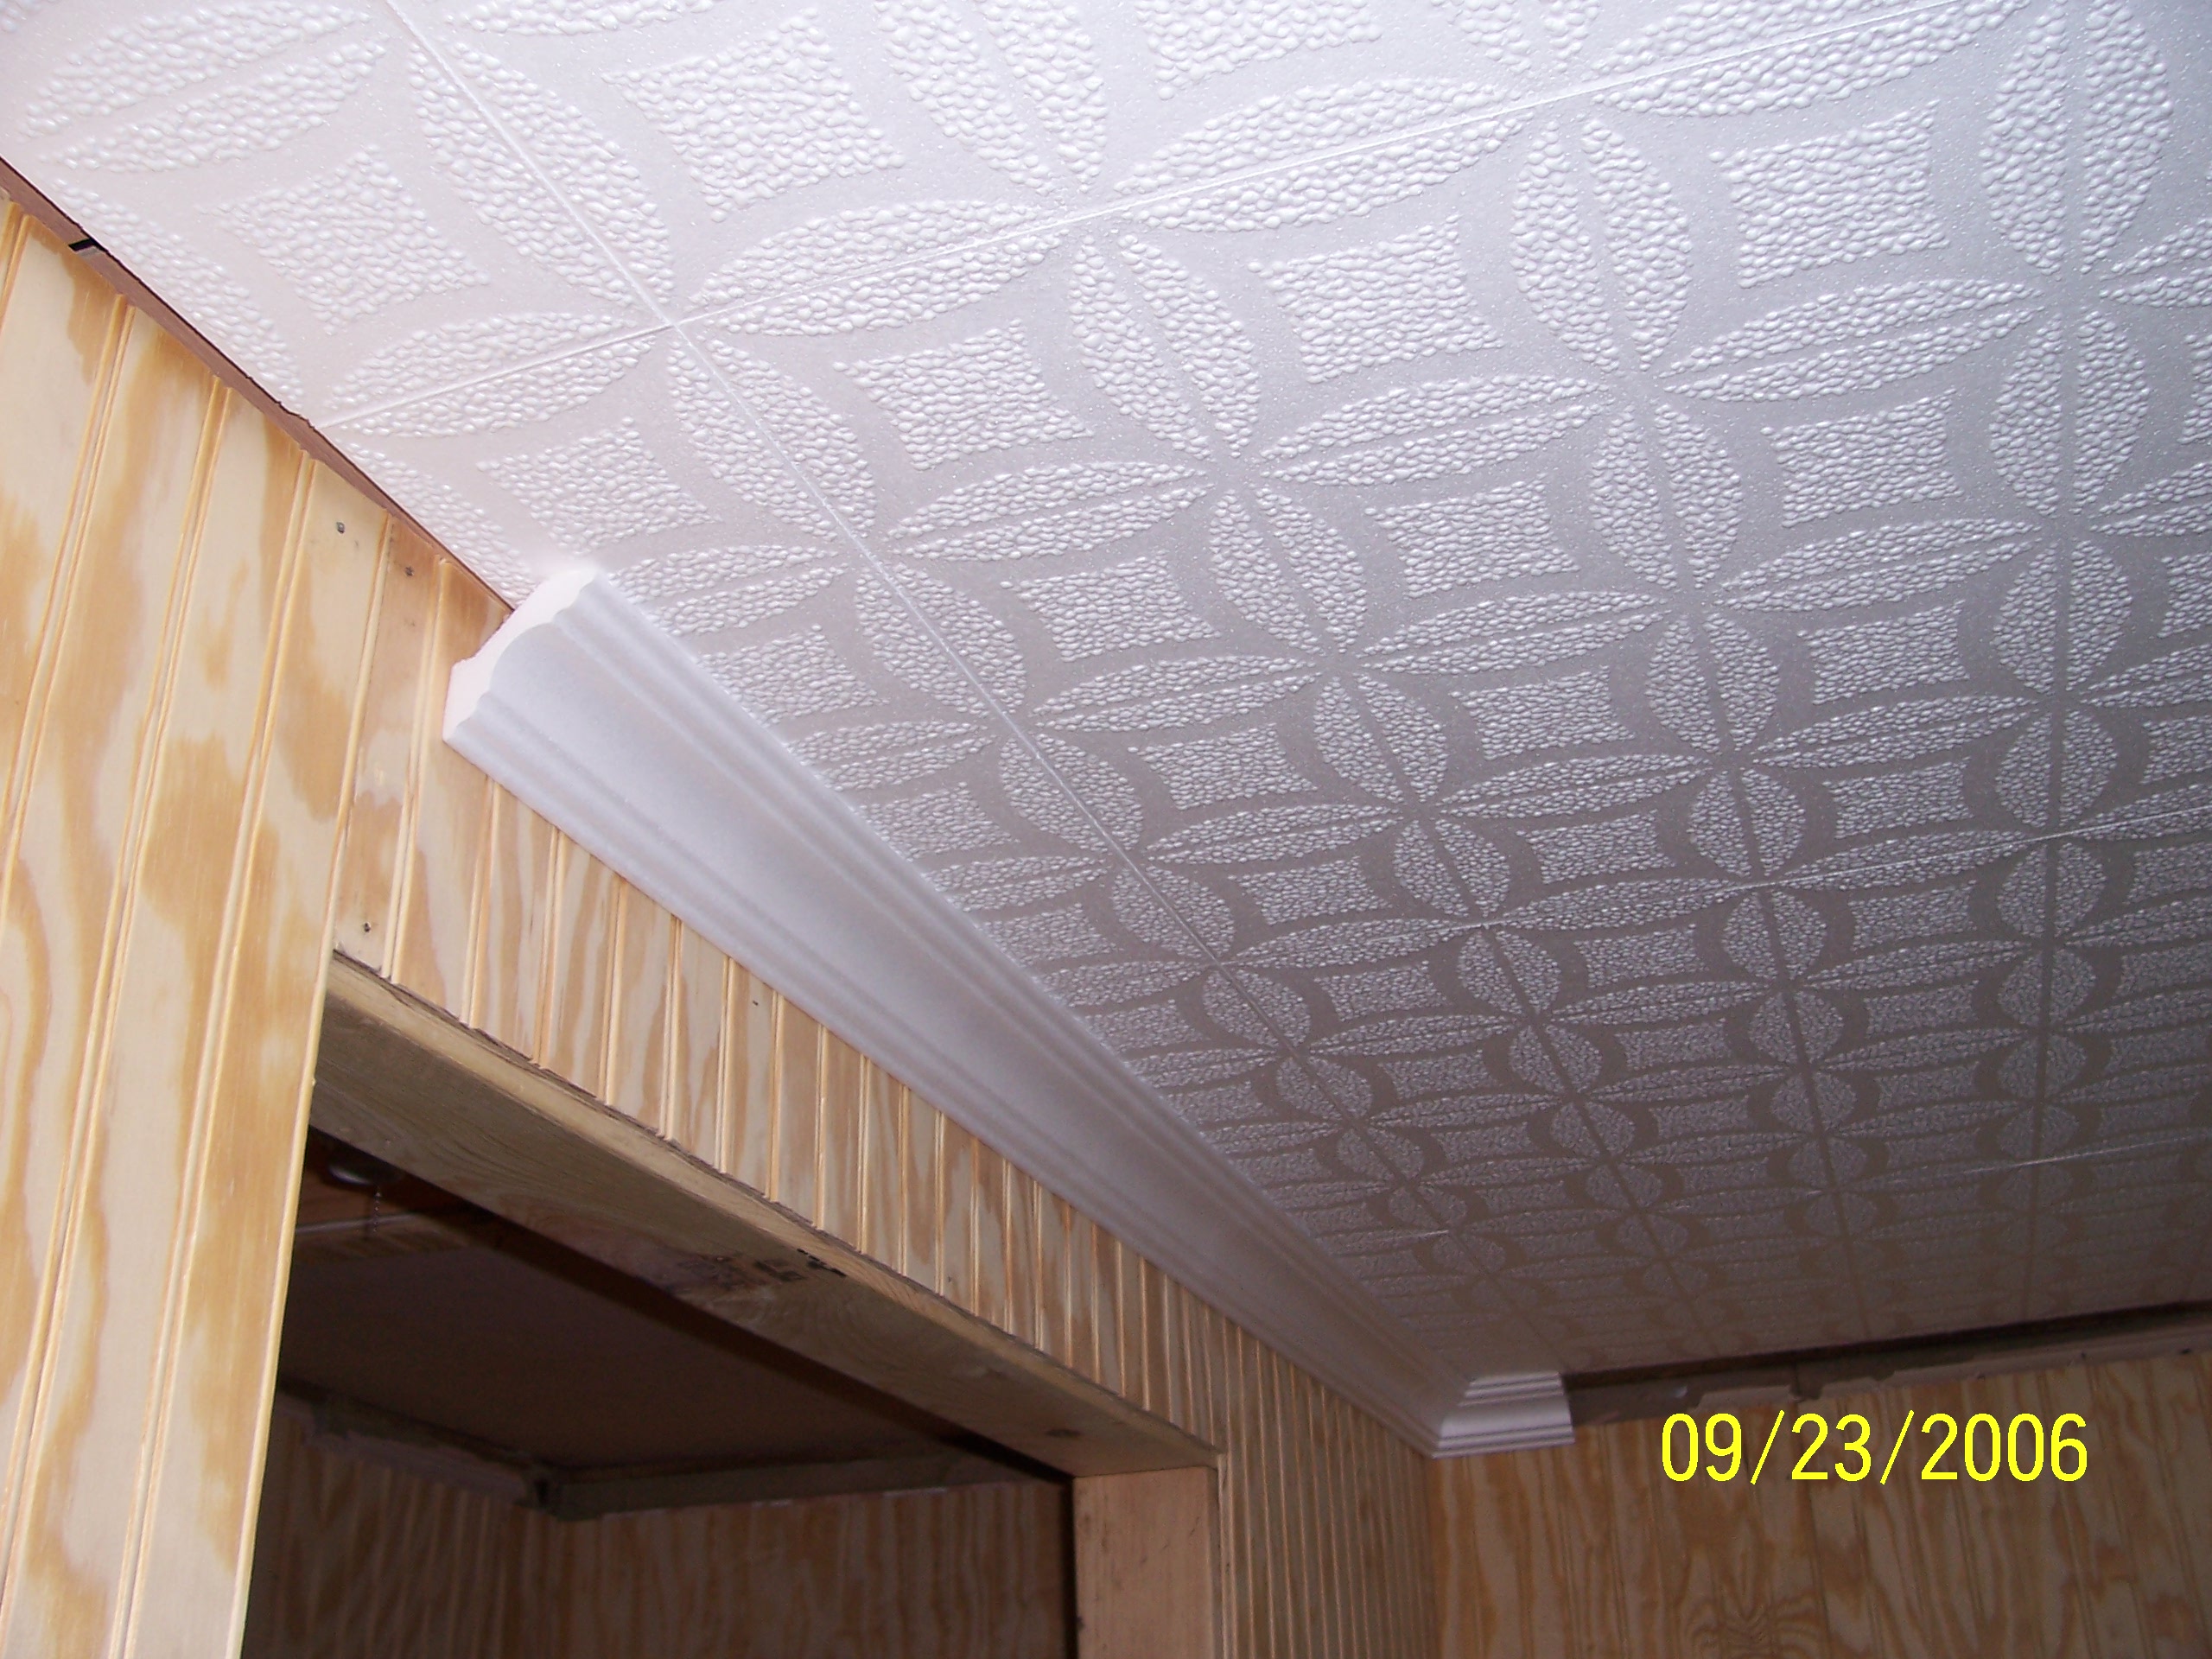 Suspended Ceiling Tiles New Car Price 2020